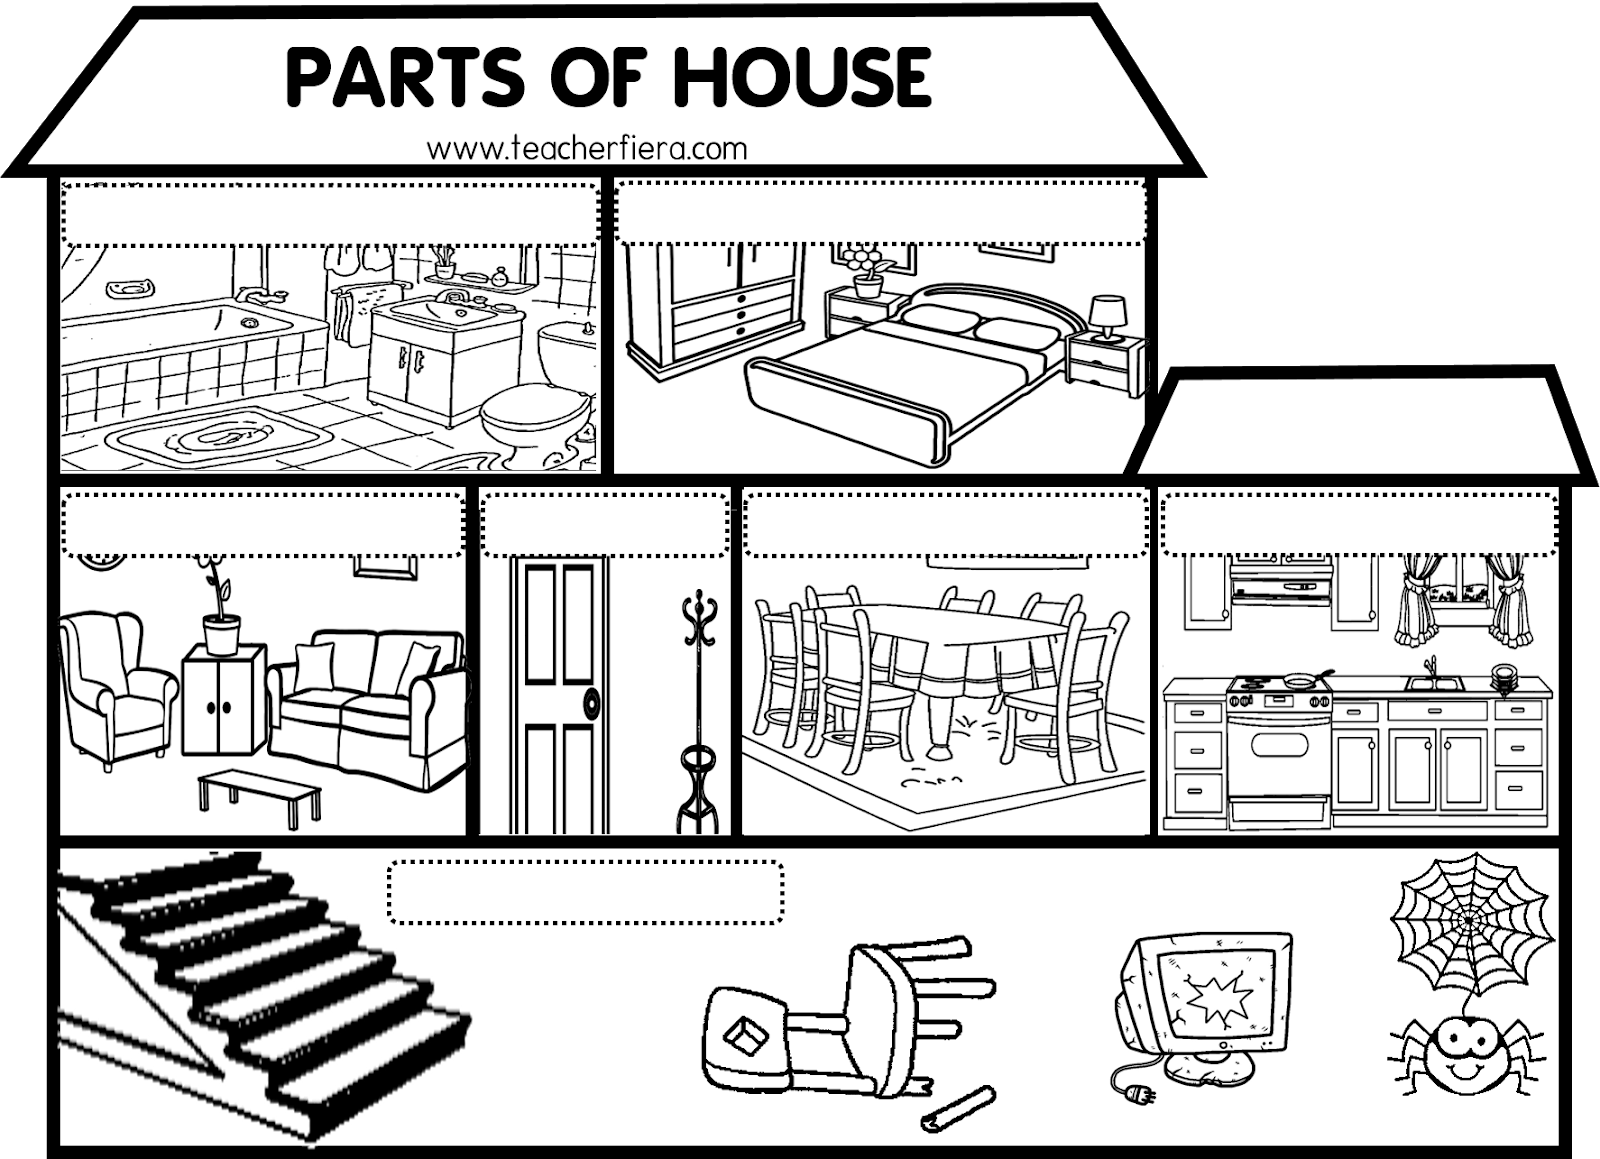 Who s in the house. Rooms in the House раскраска. Дом Worksheets. Parts of the House. The Rooms of a House задание.